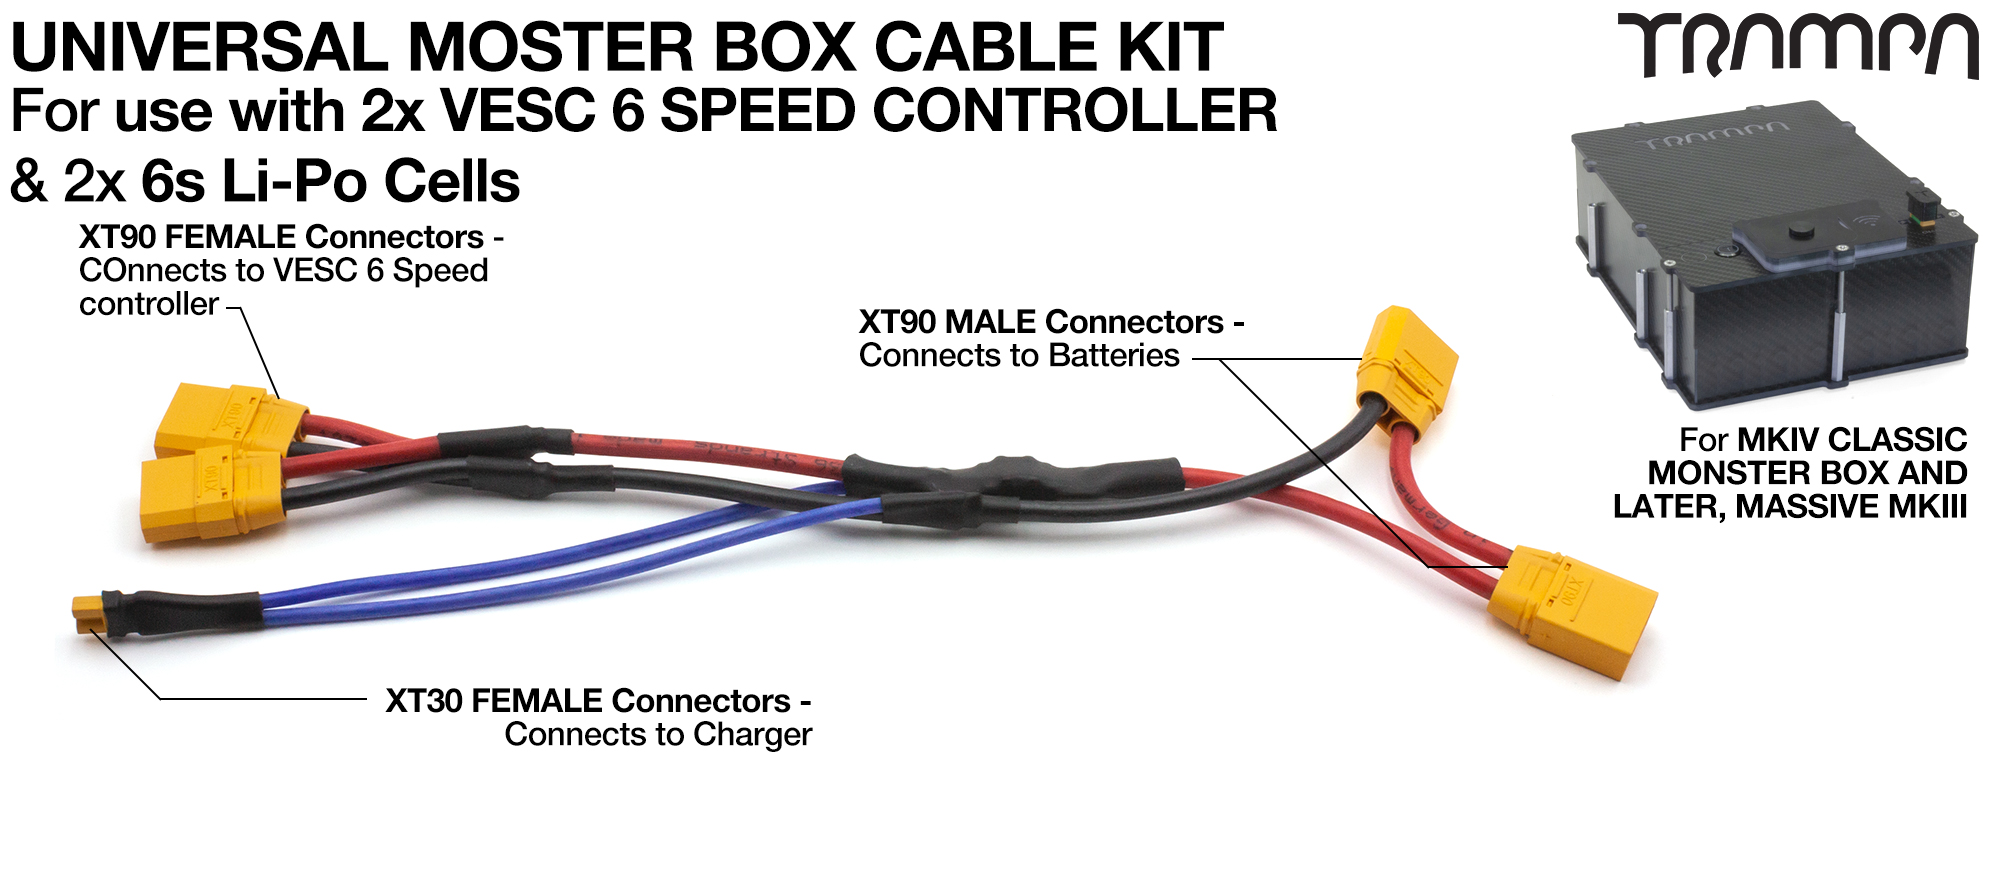 MkIV Monster Box cable kit for TWIN VESC 6 SPEED CONTROLLERS using 2x 20000 mAh Li-Po cells 